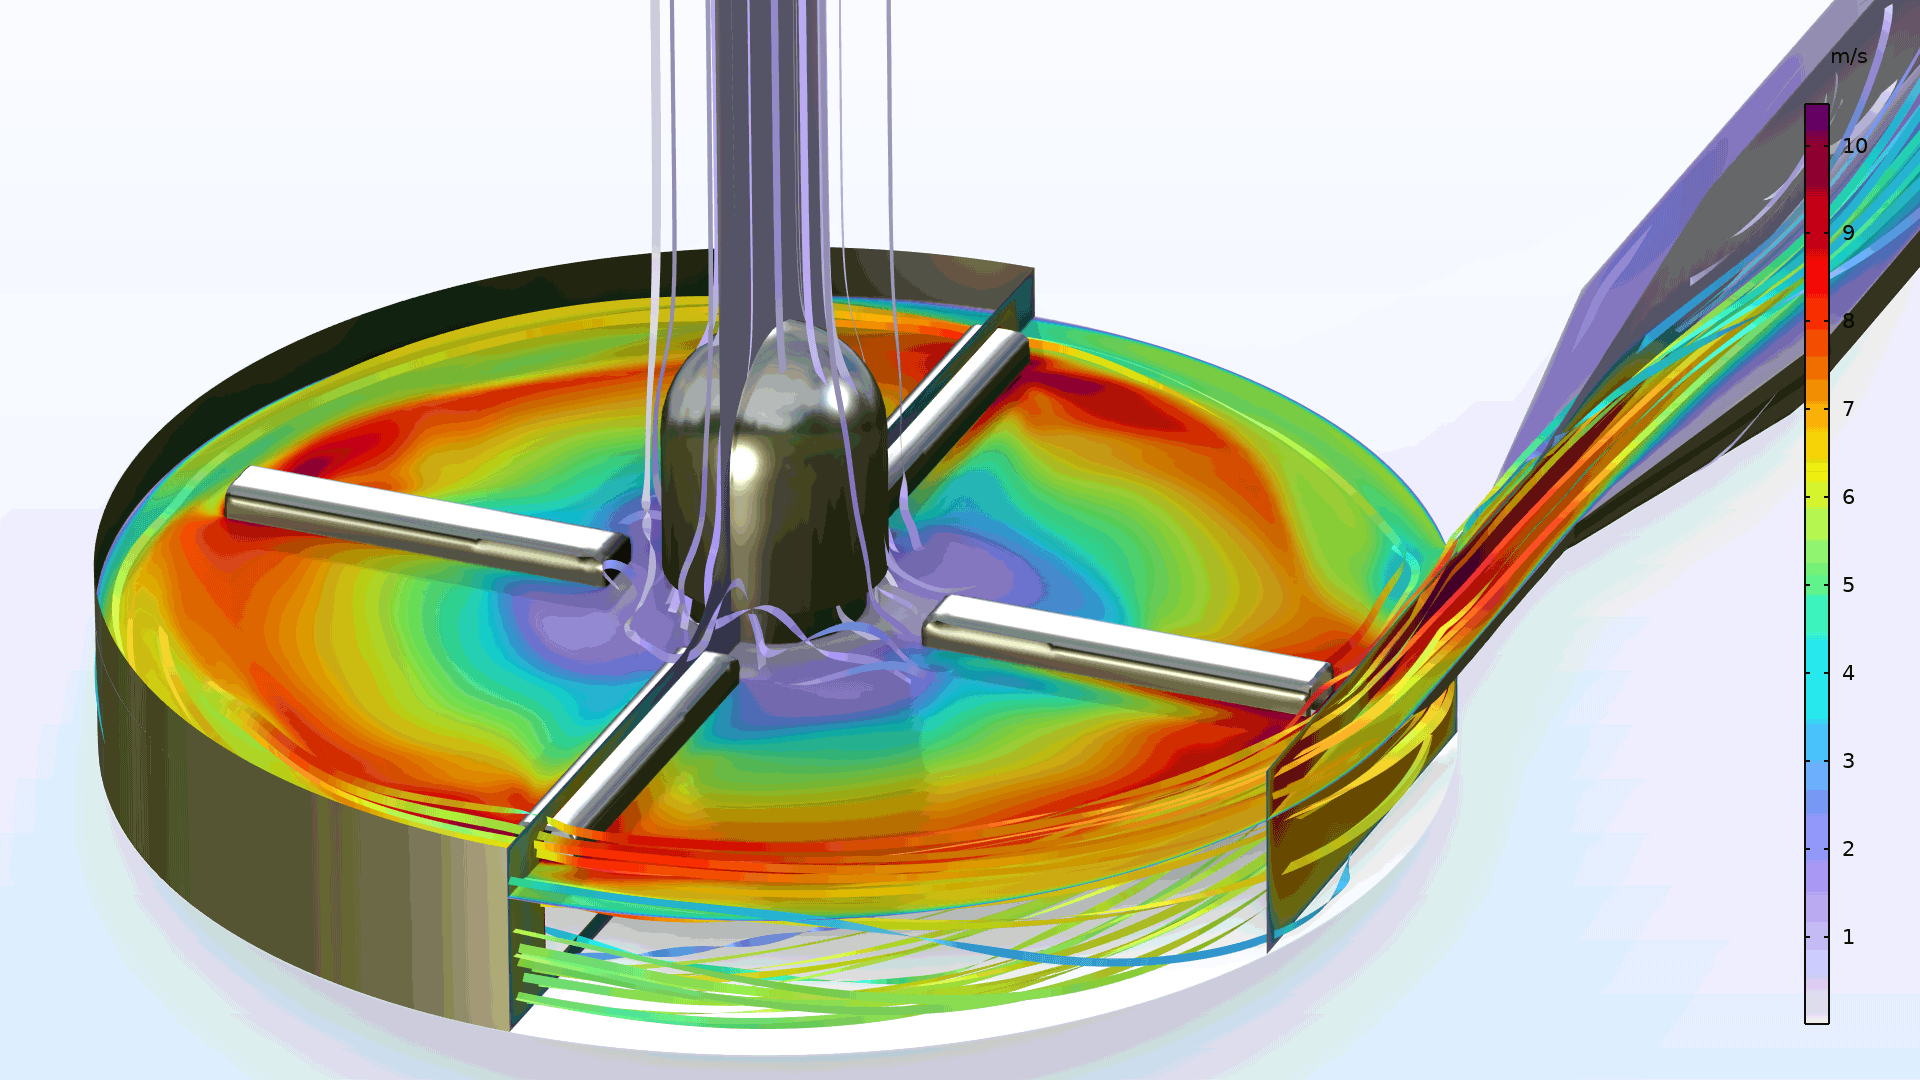 A centrifugal blood pump model in the Prism color table.